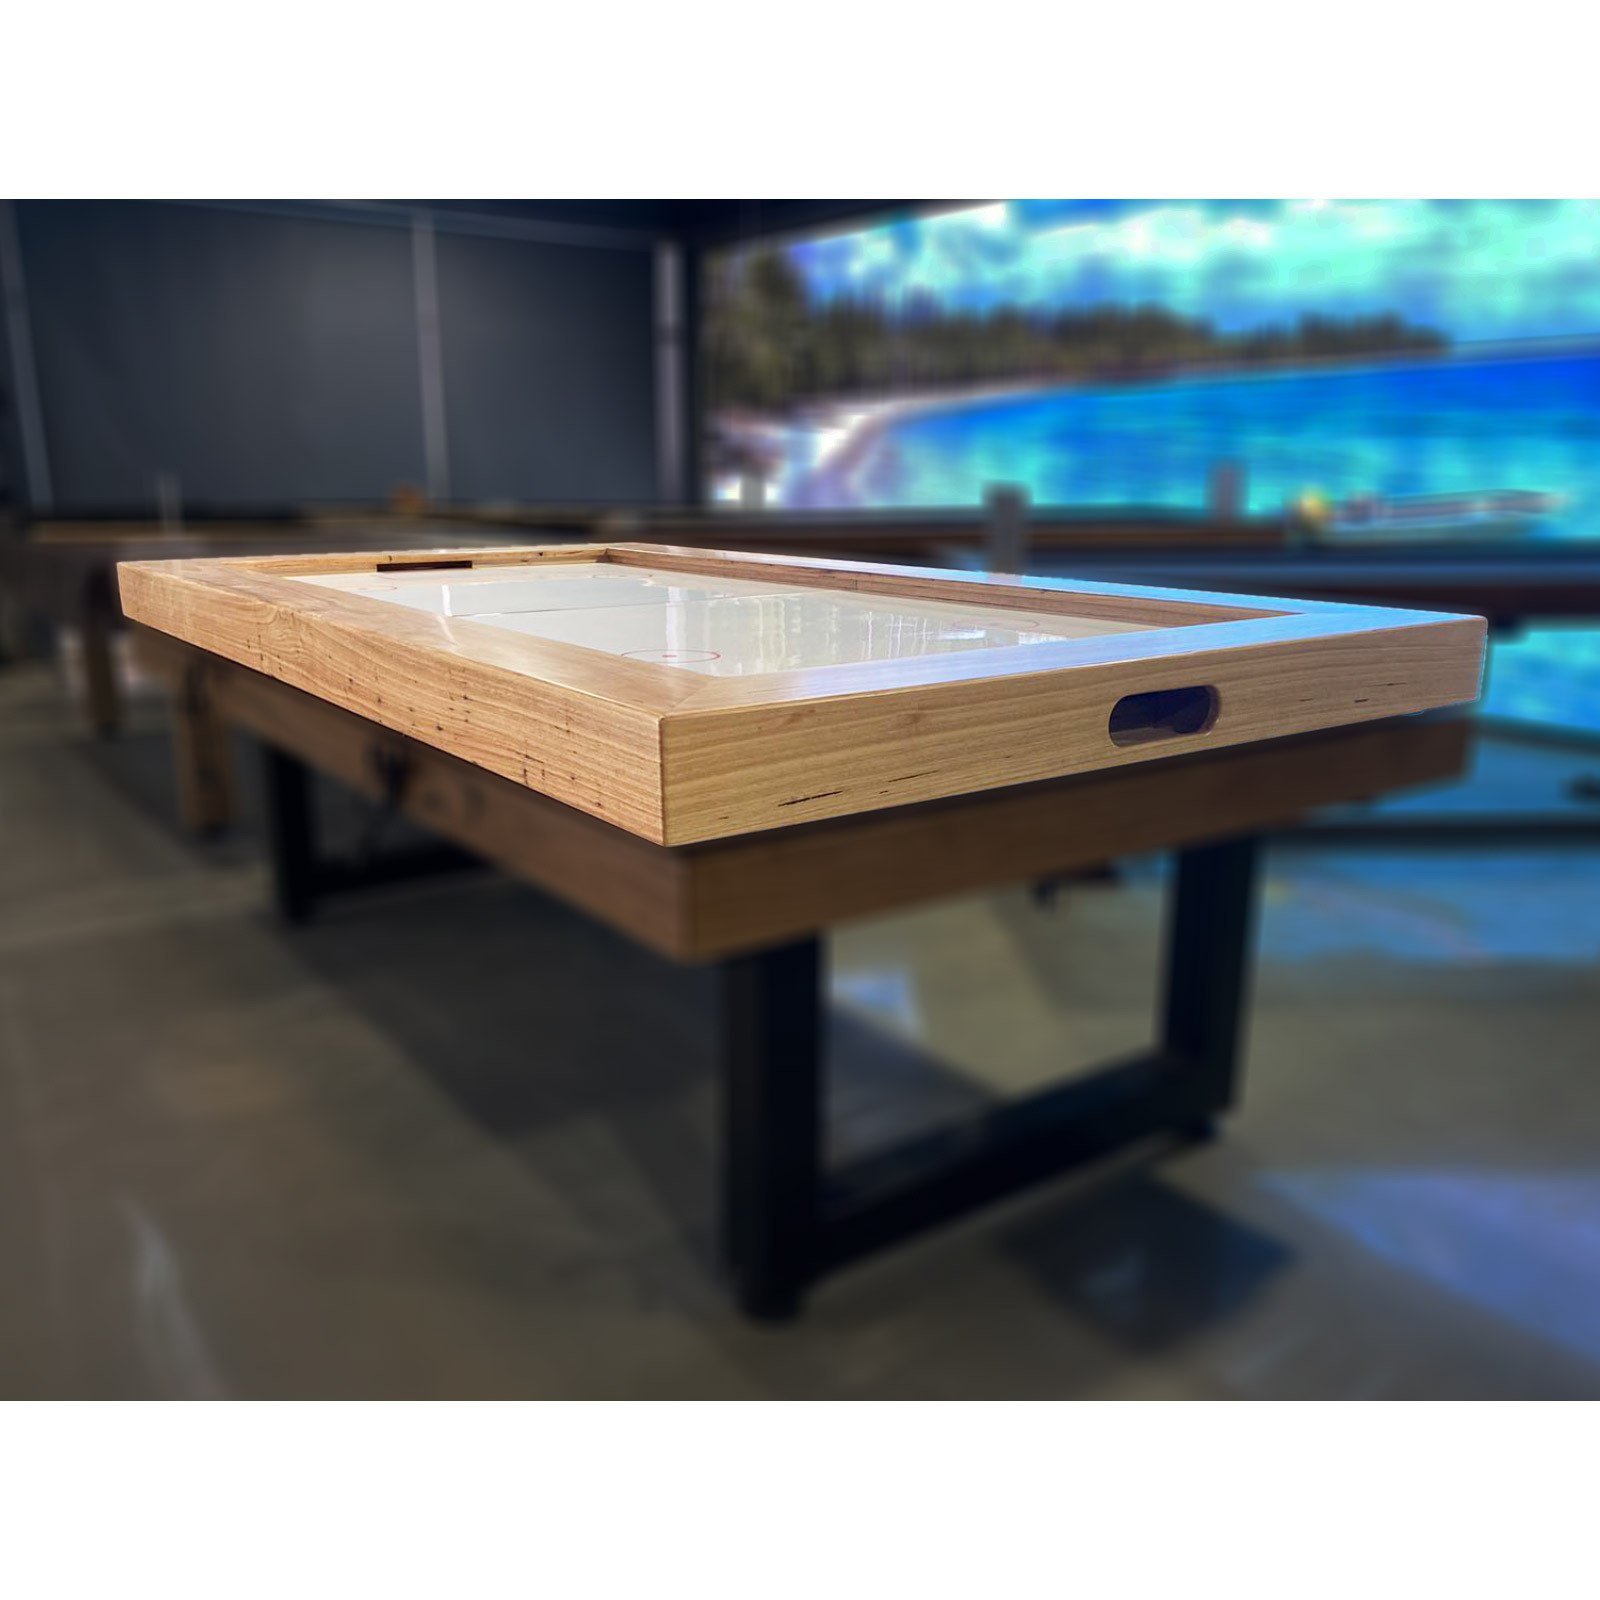 8ft 2pc Custom Made Timber Surround Air Hockey Table Top